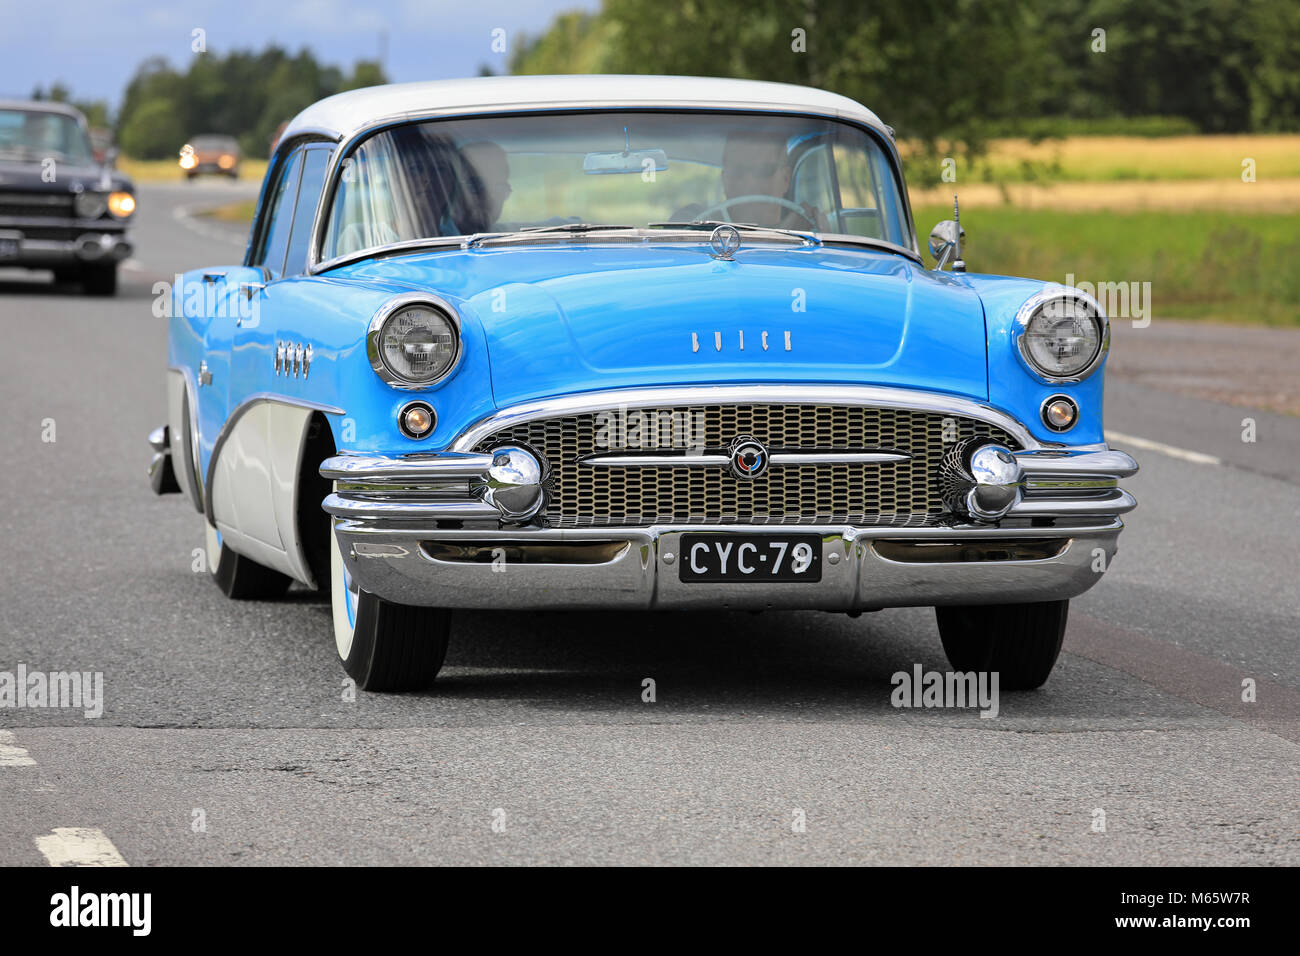 SOMERO, FINLAND - AUGUST 5, 2017: Classic blue and cream Buick Special 4-door sedan, circa 1955, moves along rural highway on Maisemaruise 2017 car cr Stock Photo